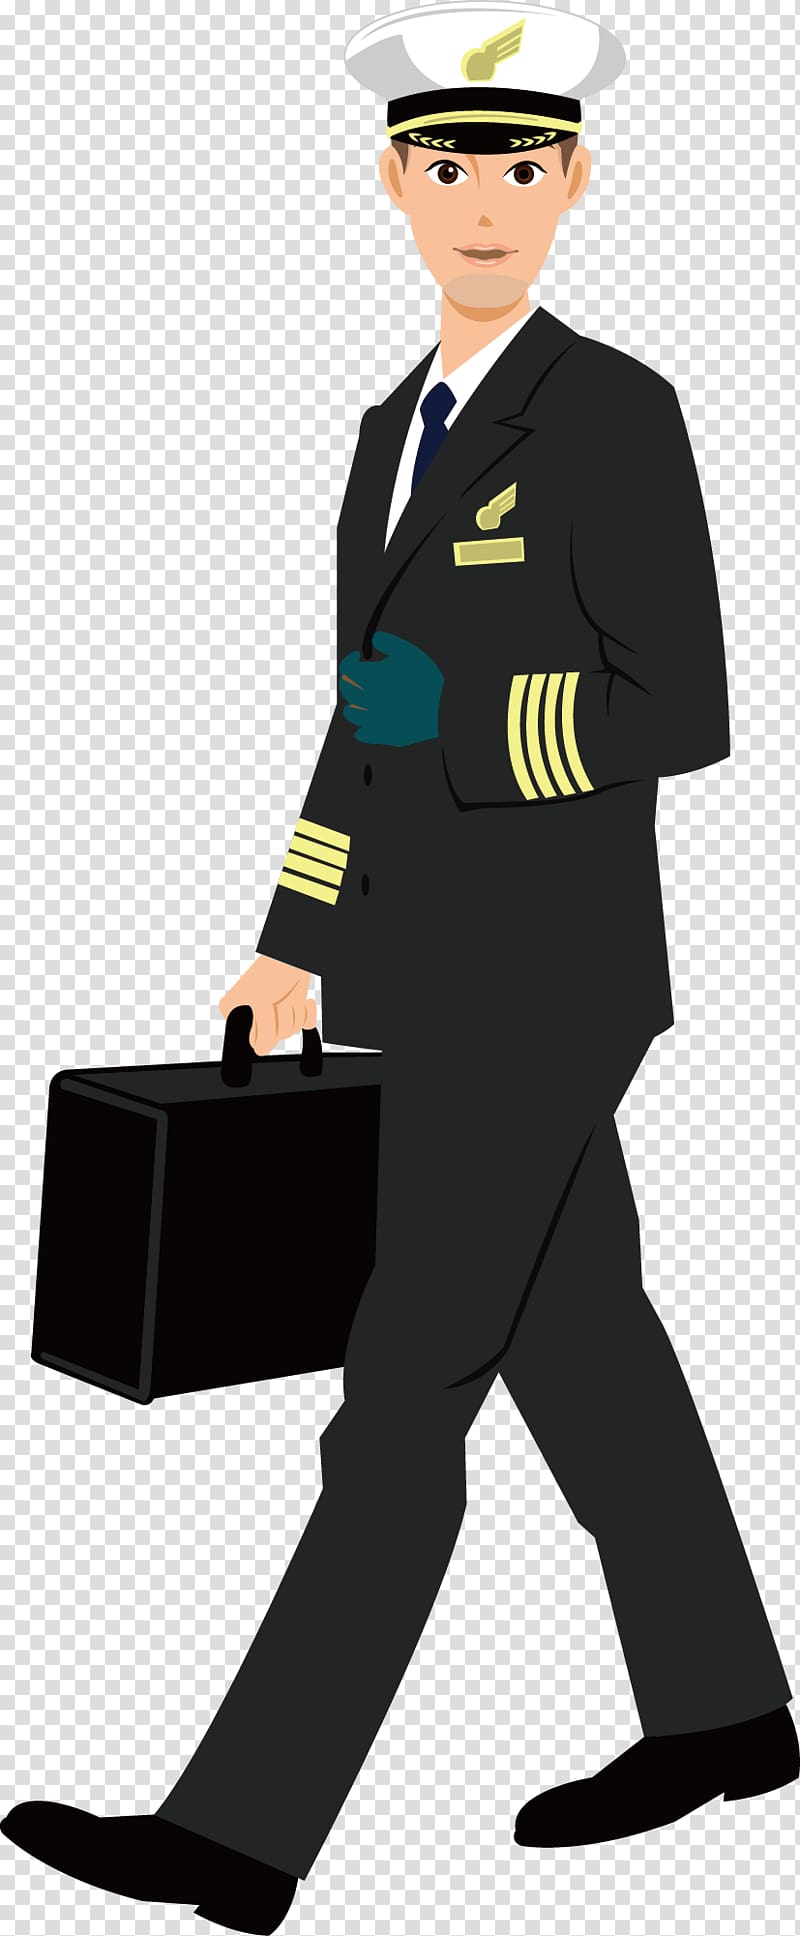 Flight attendant Airplane Pilot in command, airplane transparent background PNG clipart